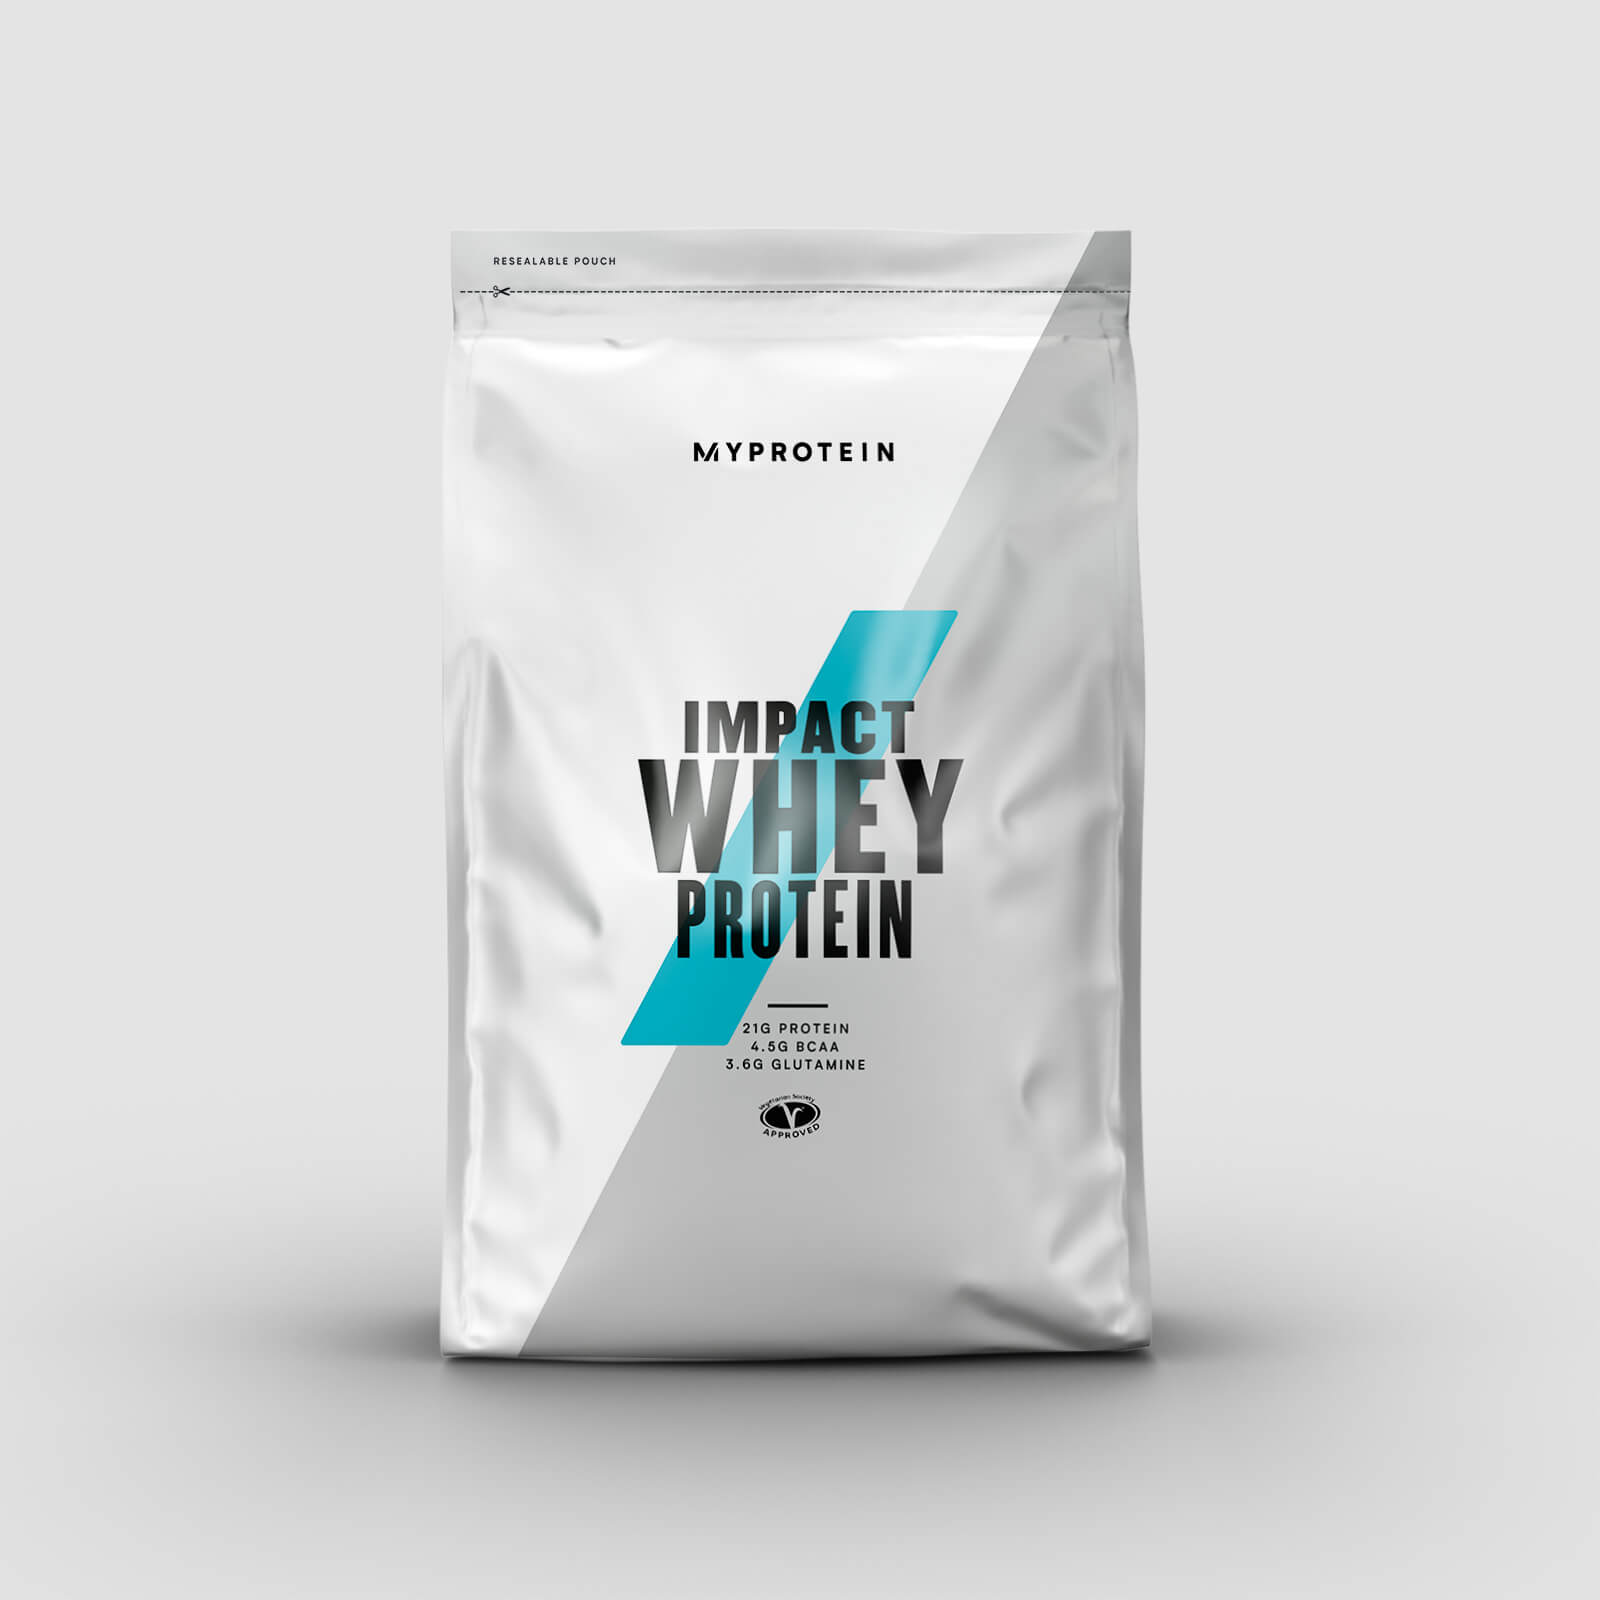 Myprotein Vassleprotein - Impact Whey Protein - 250g - Chocolate Brownie - New and Improved